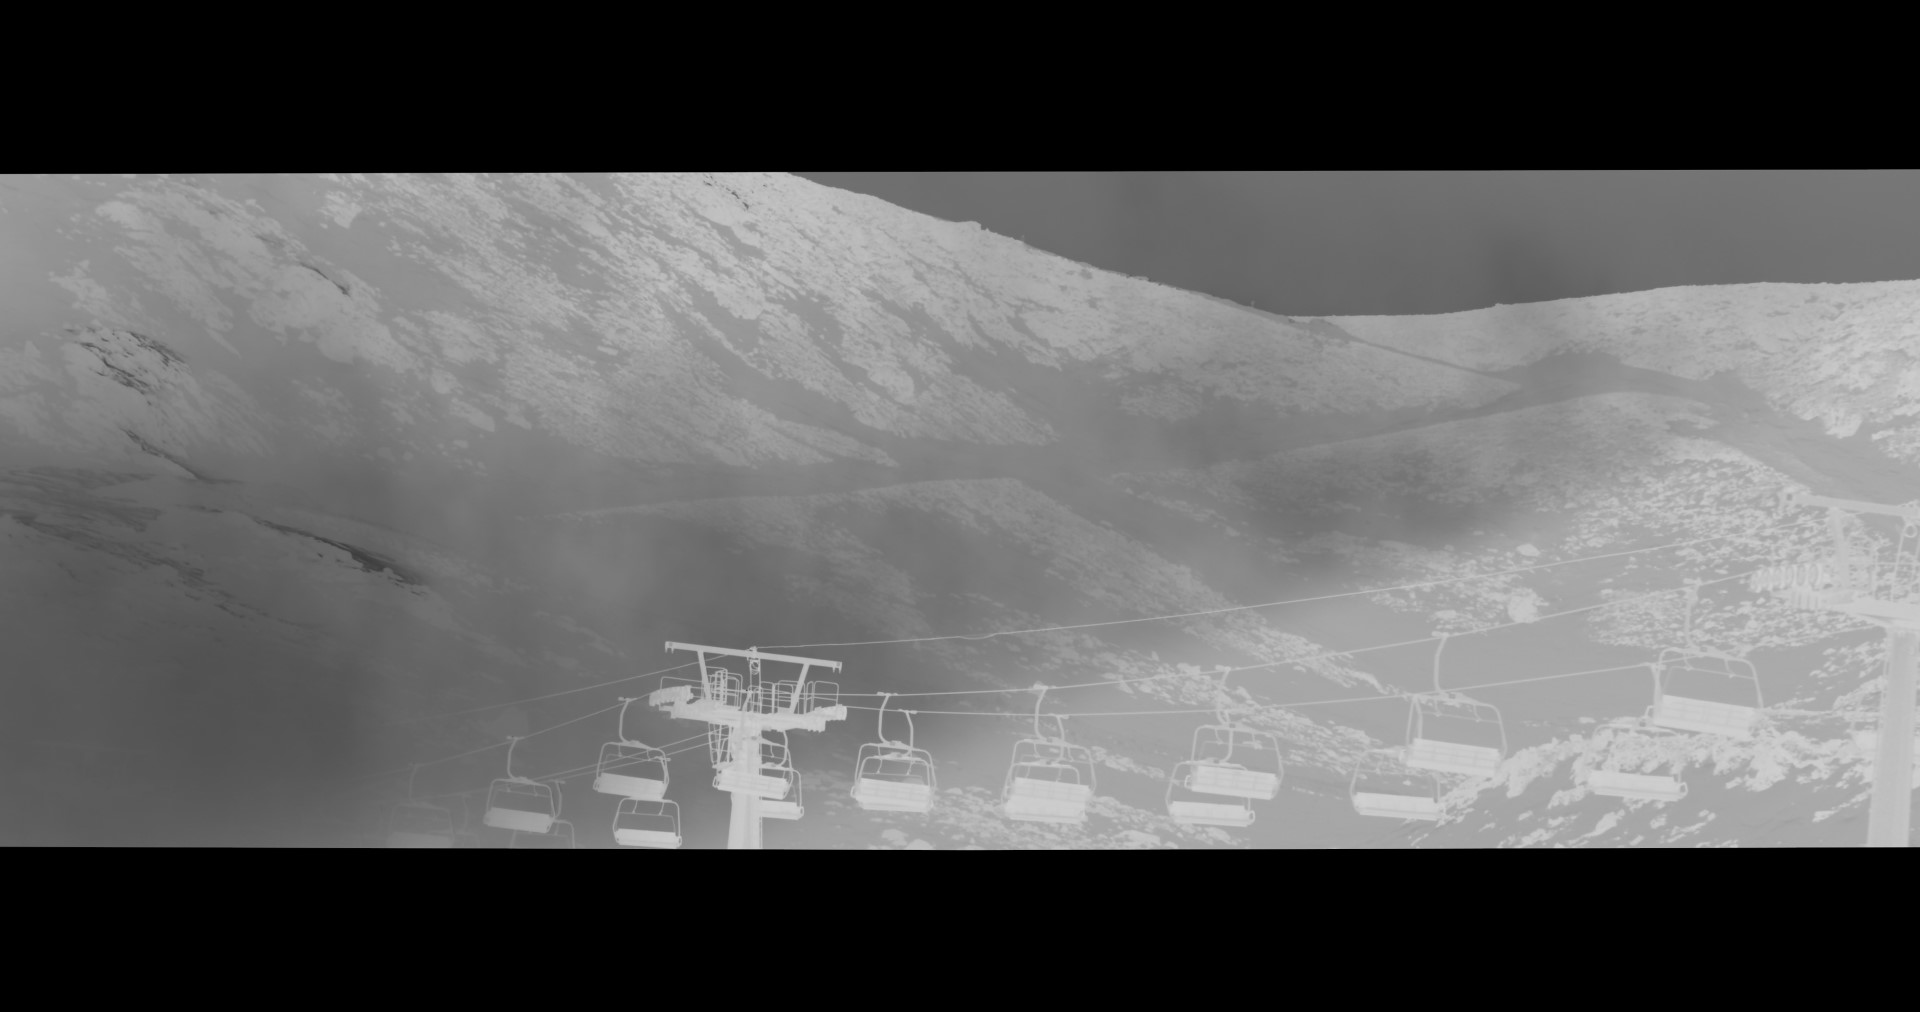 An inverted, greyscale image of a chair lift next to a mountain.